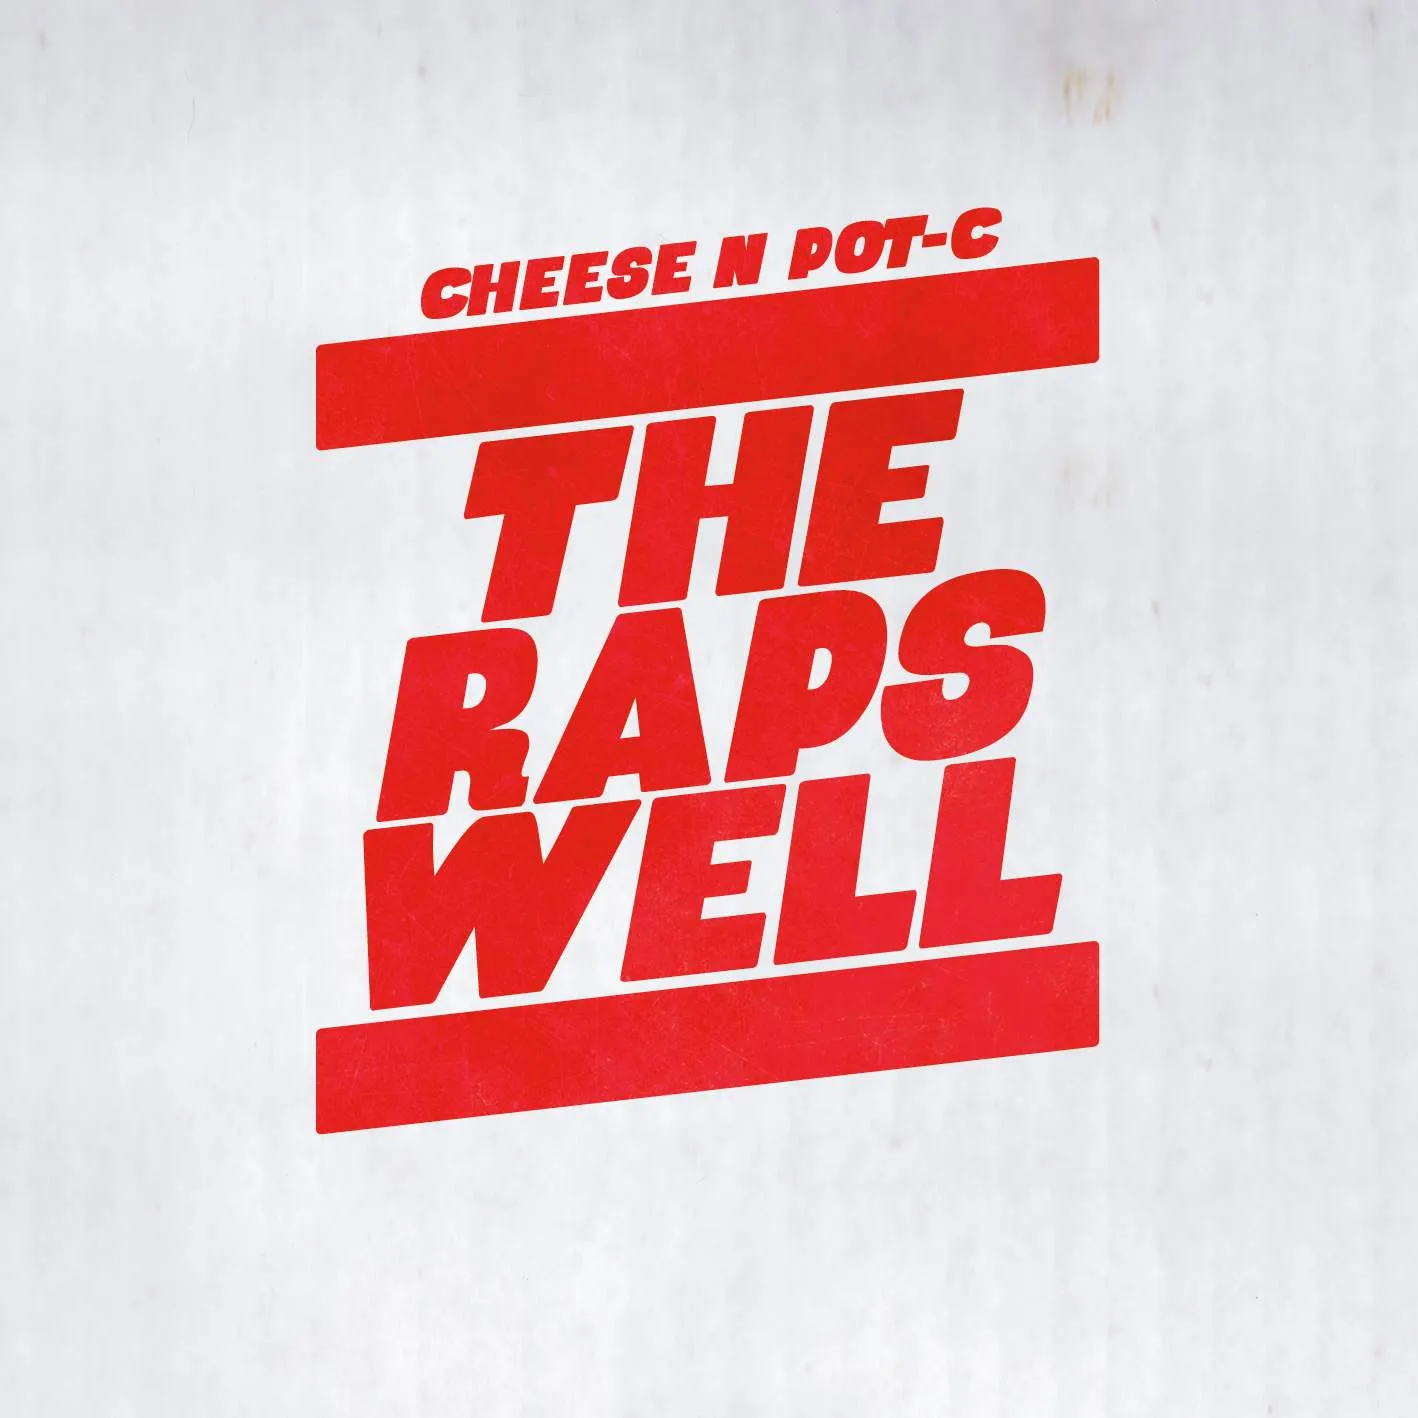 Album cover for “The Raps Well” by Cheese N Pot-C